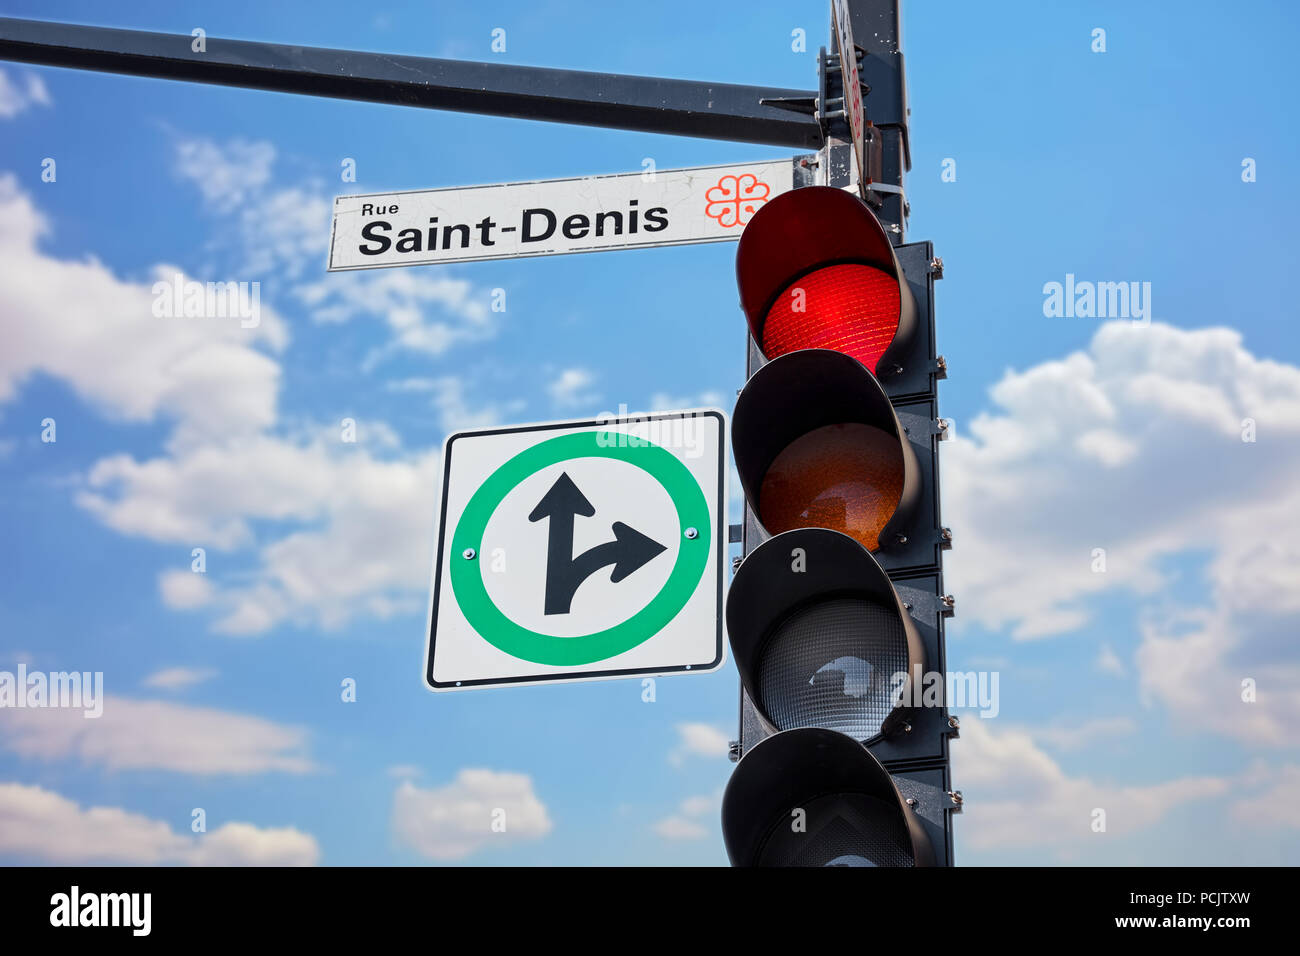 Saint Denis street sign attached to a traffic light signaling red in Montreal Quebec Canada Stock Photo